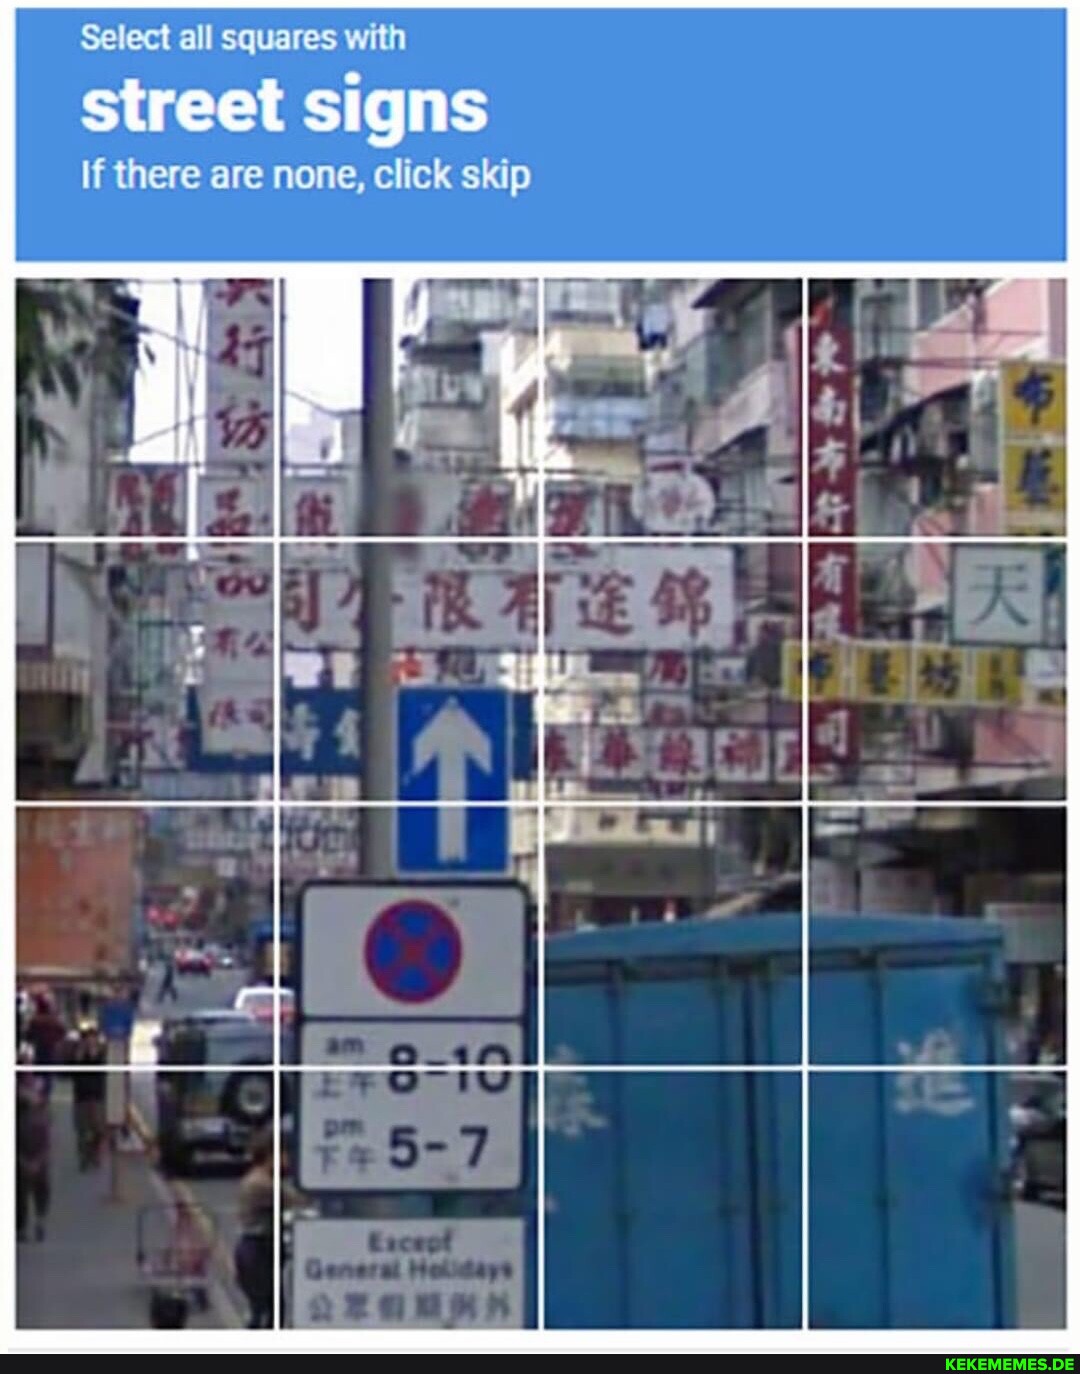 Select all squares with street signs if there are none, click skip